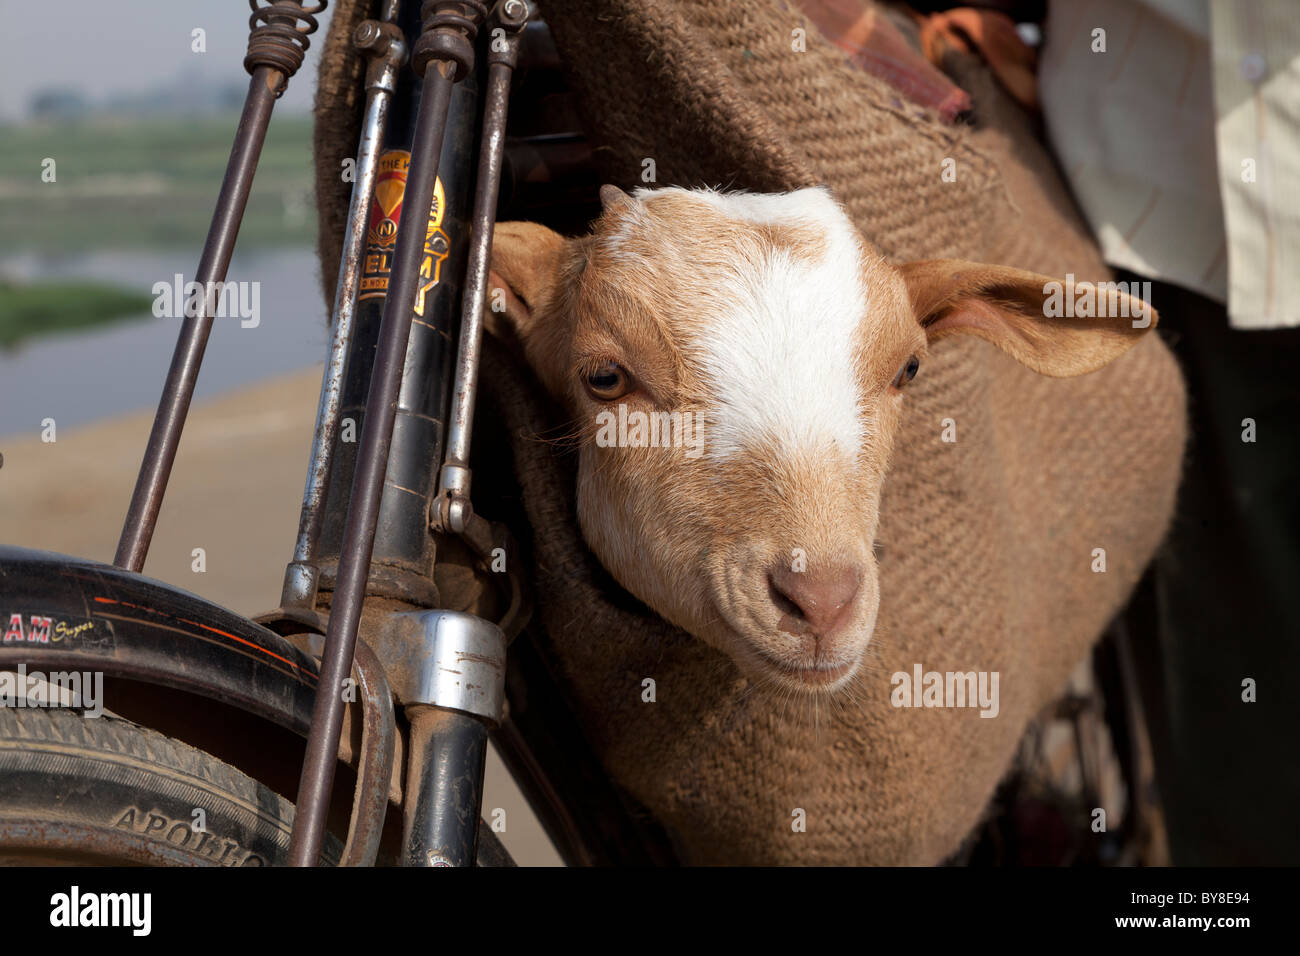 India, uttar Pradesh, Agra, close-up of a pushbike and a goat in a sack on way to market Stock Photo